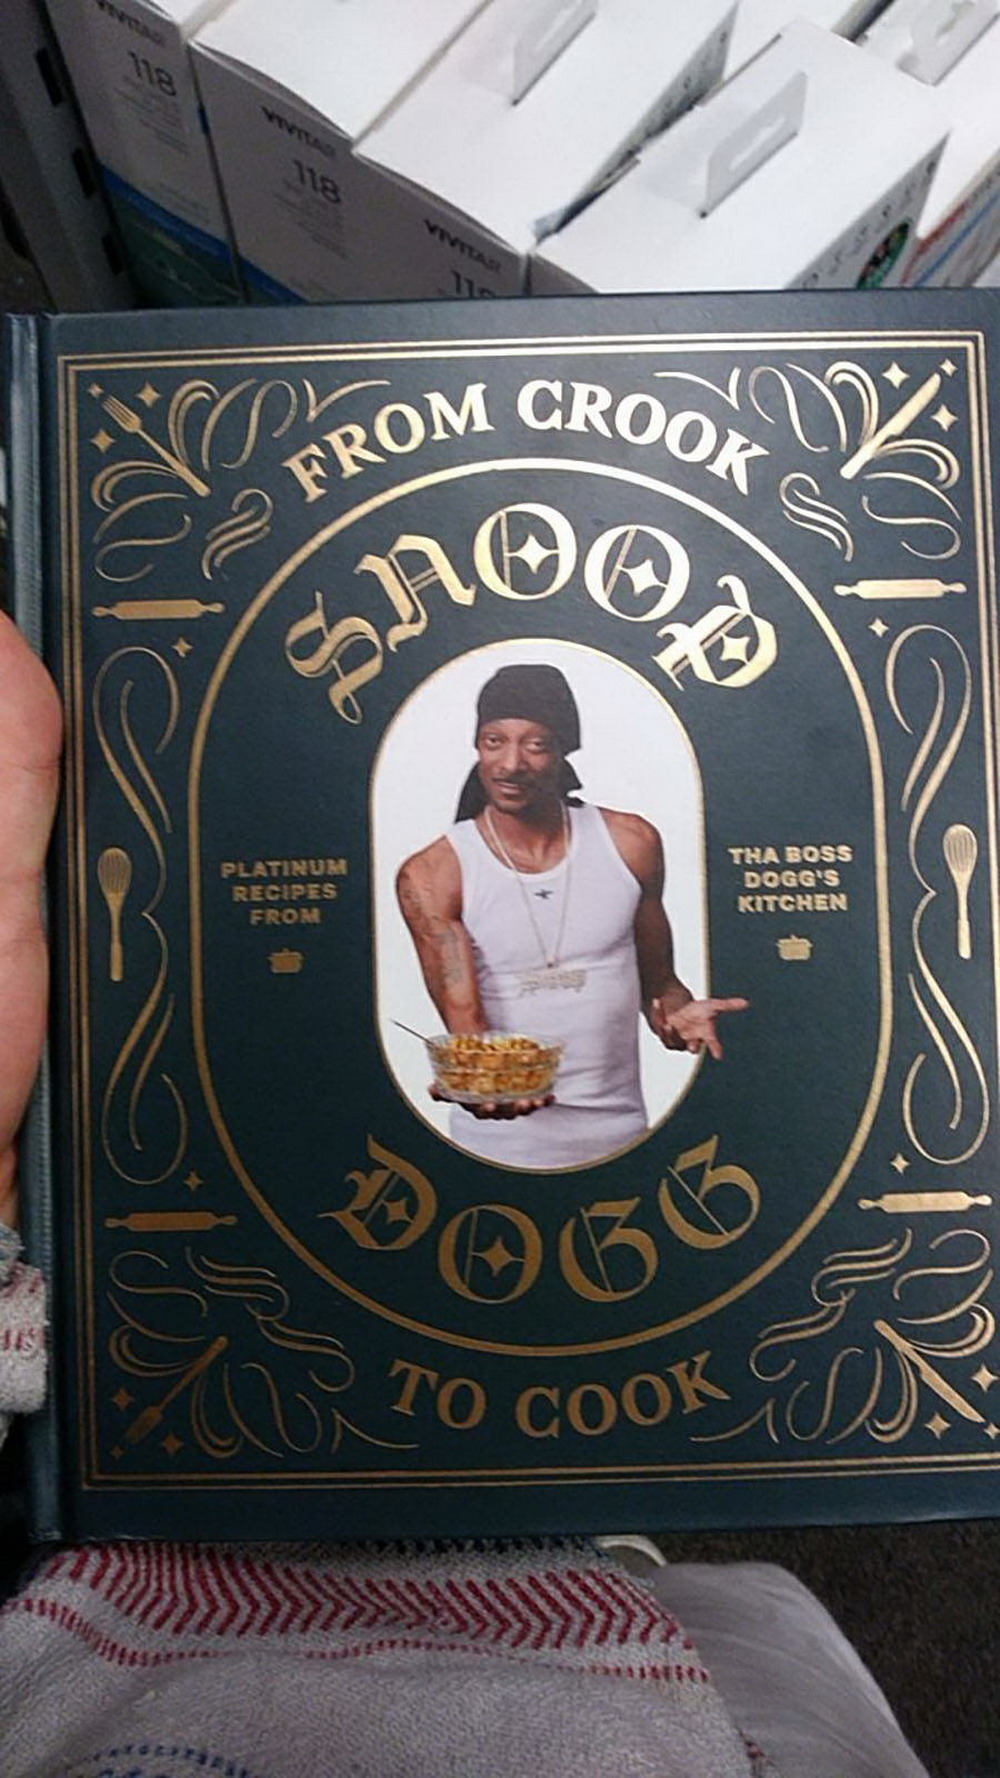 woodford reserve - Spirom Crooku Ook S Q From Platinum Recipes From Tha Boss Dogg'S Kitchen